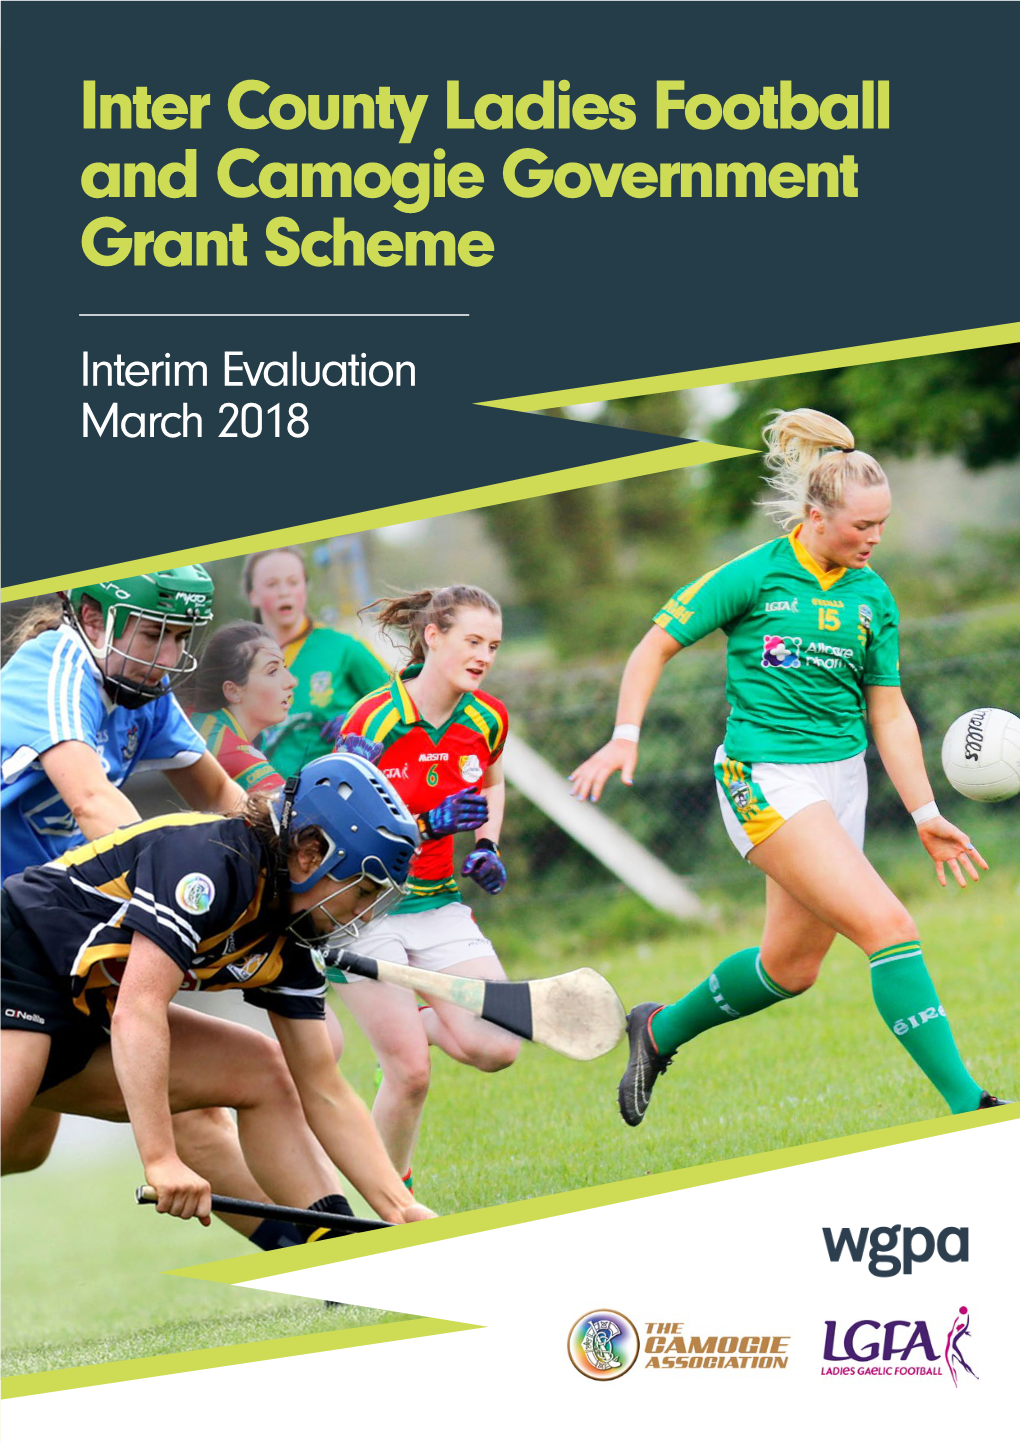 Inter County Ladies Football and Camogie Government Grant Scheme